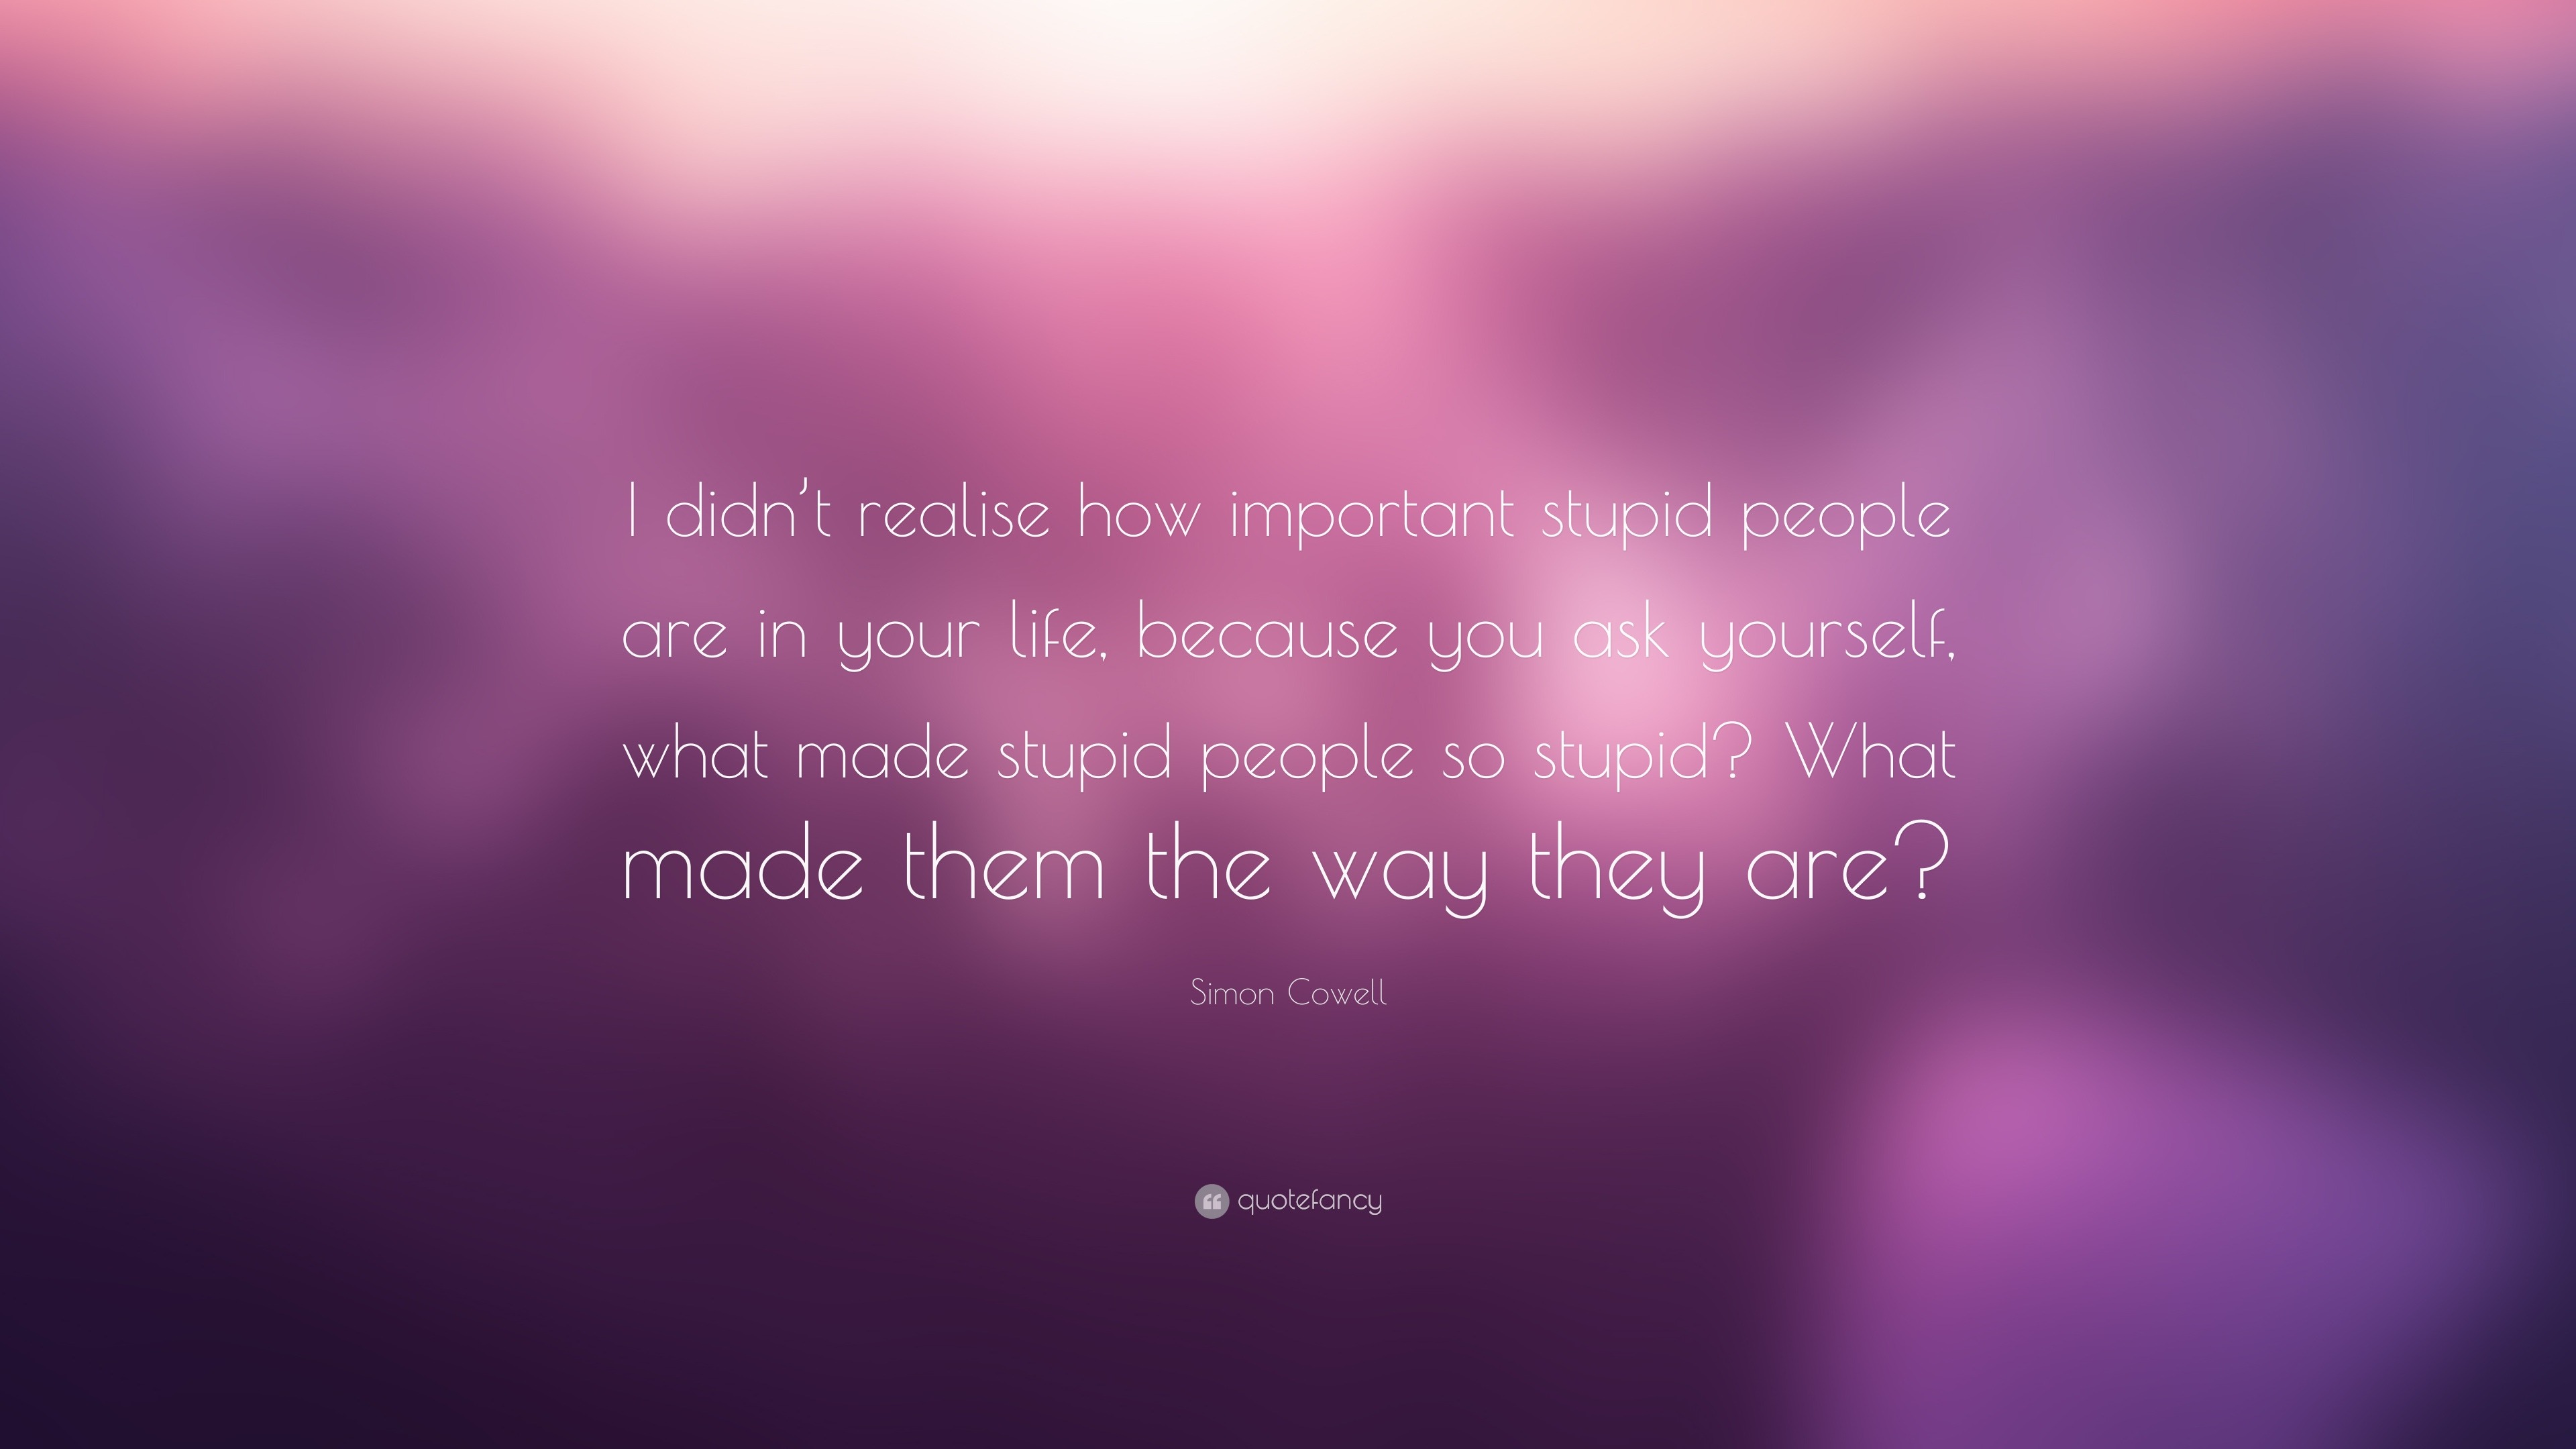 Simon Cowell Quote “I didn t realise how important stupid people are in